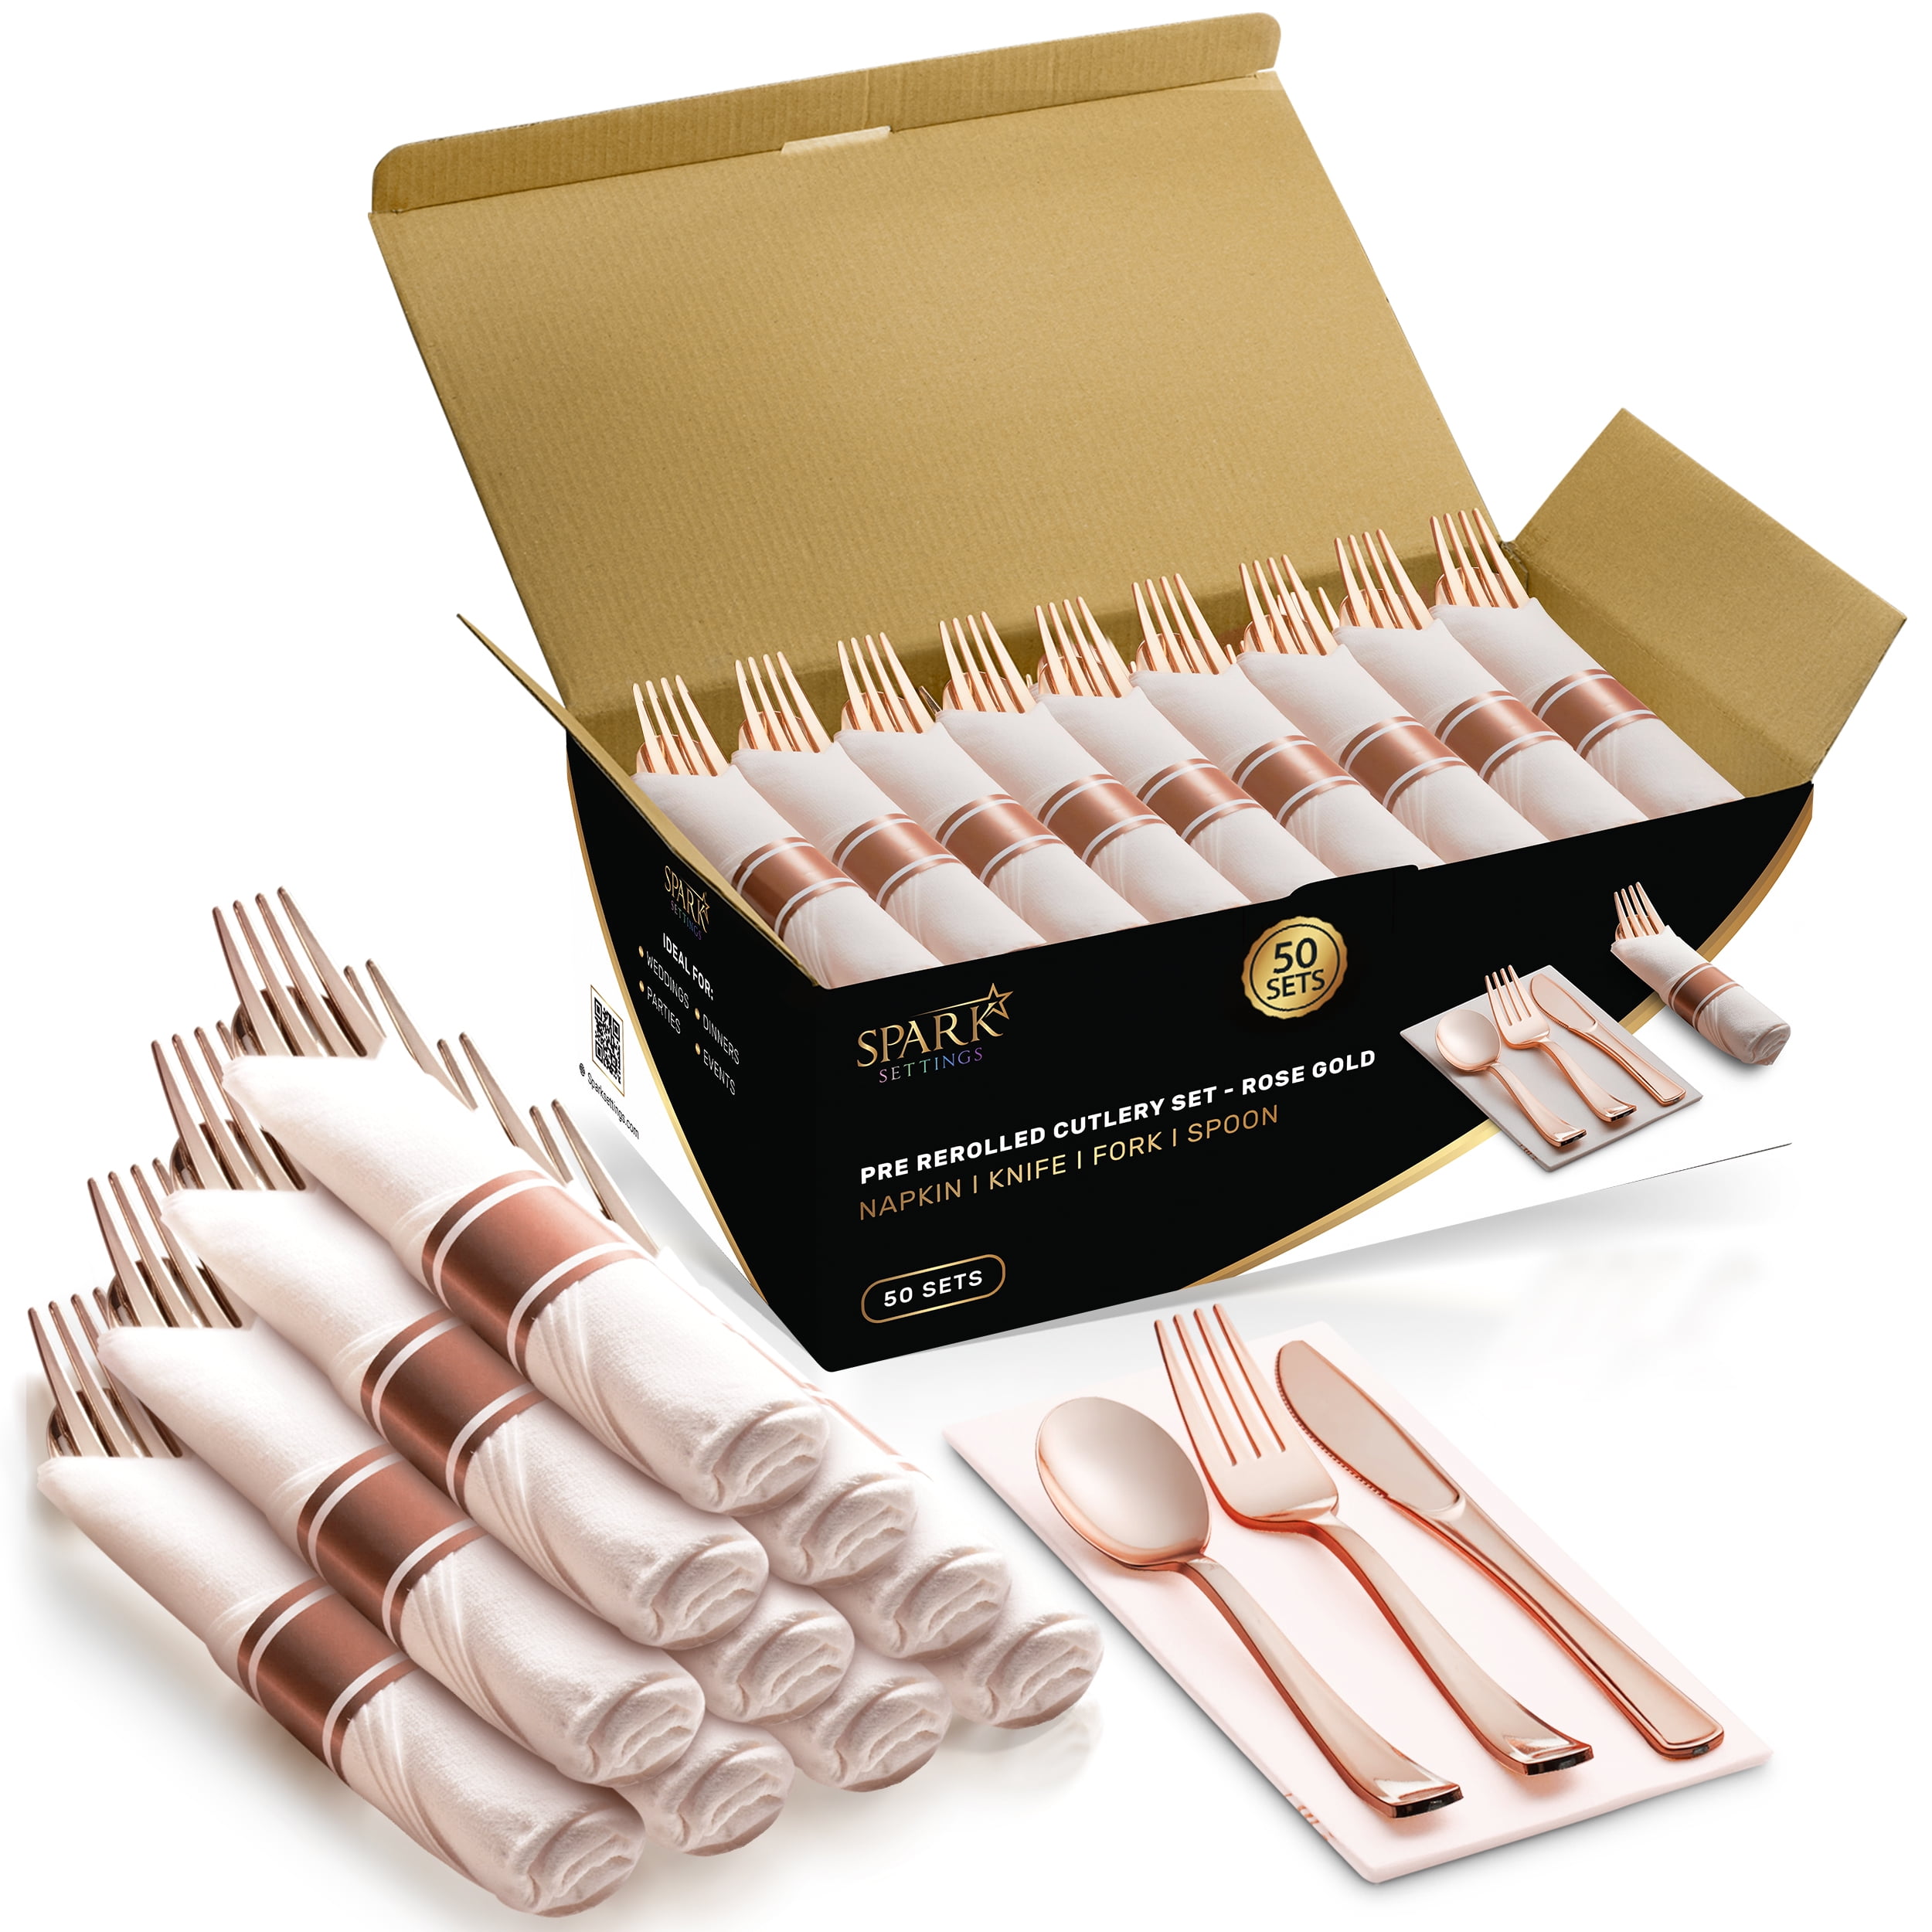 Gold Plastic Silverware: 250 Piece Set with 100 Forks, 50 Knives, 50  Spoons, and 50 Mini Spoons – Select Settings